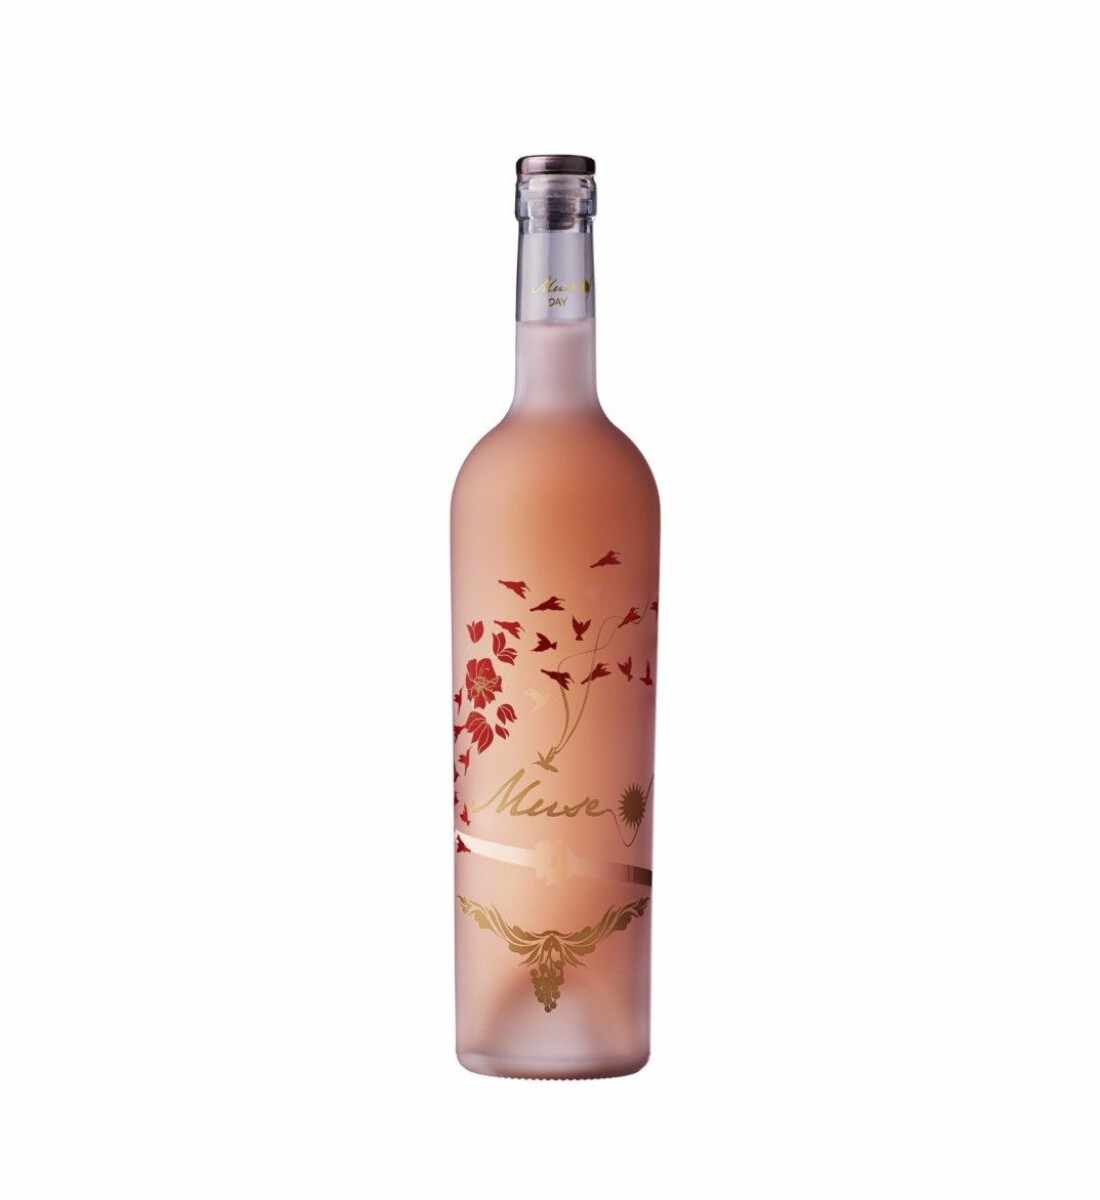 Recas Muse Day Rose 0.75L